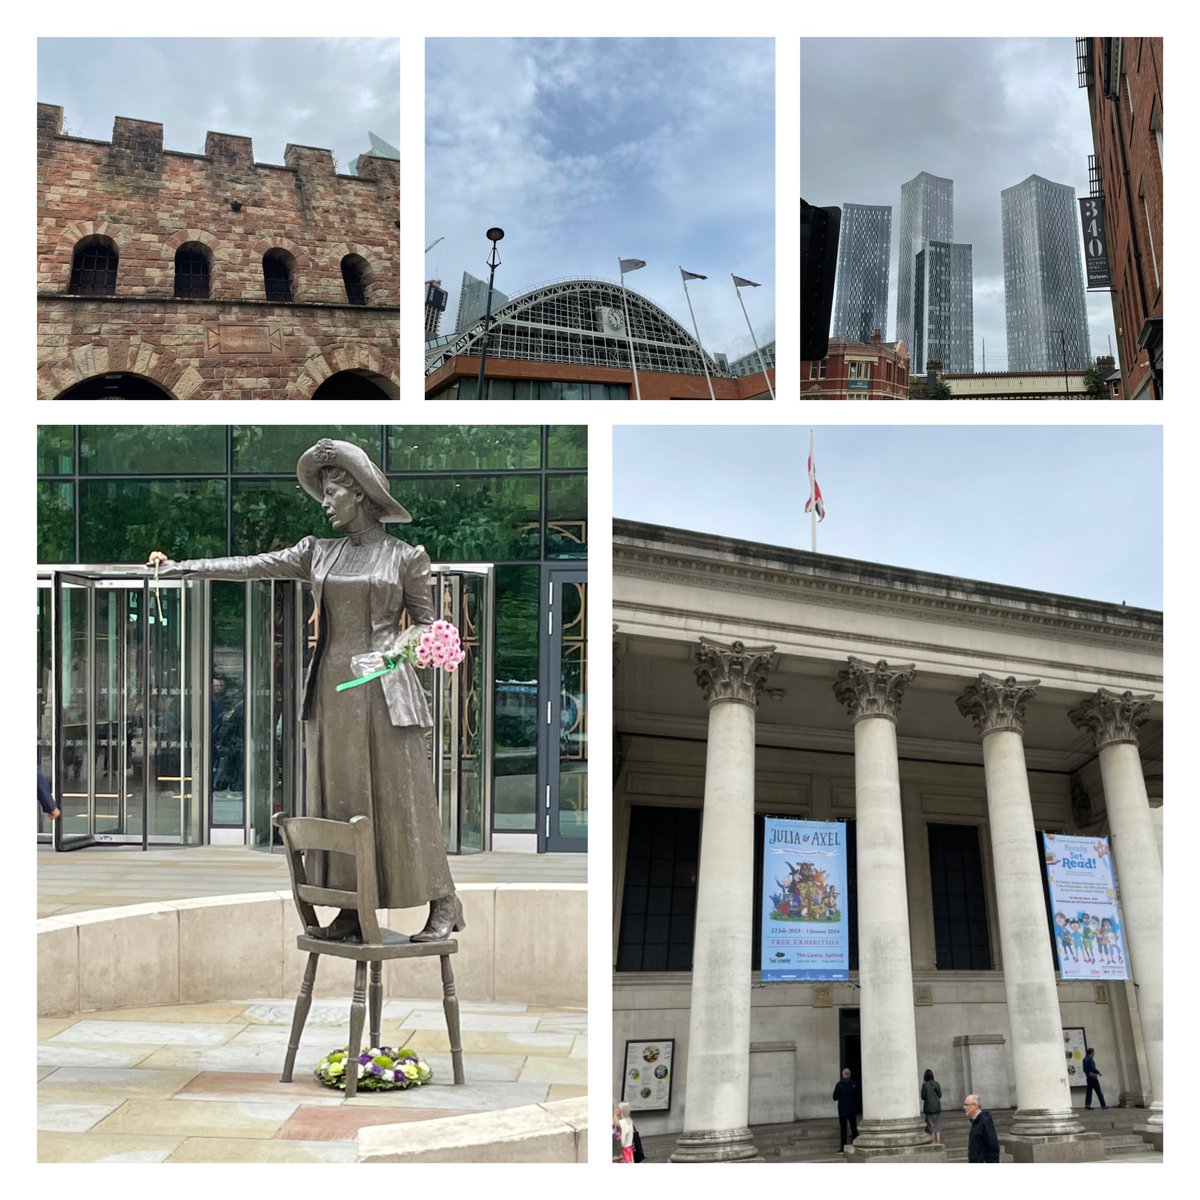 Great to be able to walk around Manchester today & visit the art gallery. It might have rained, but Manchester is a fab city! #thisistheplace